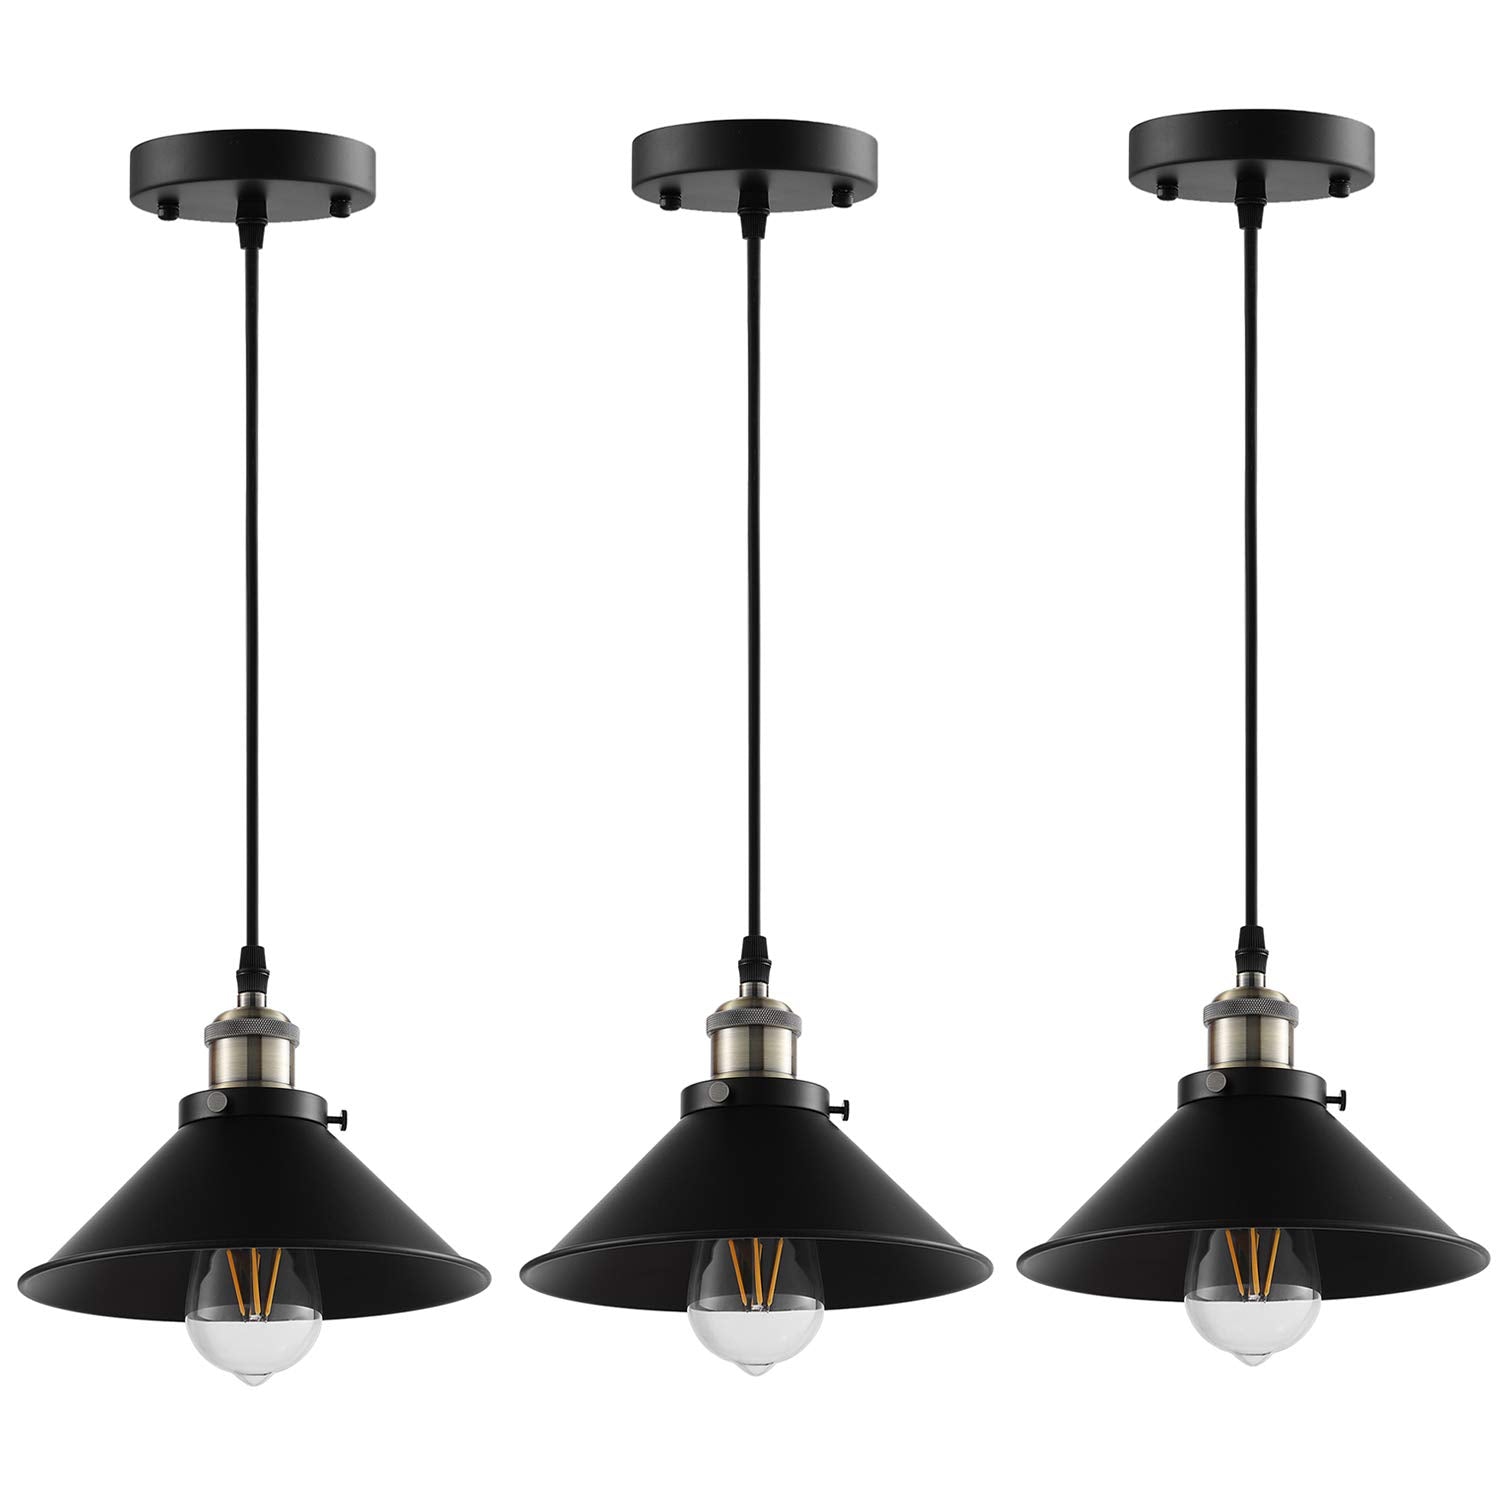 Industrial Pendant Lighting,Vintage Hanging Lamp E26 Base,Bronze and Black Finish, Retro Lighting Fixture 3 Pack (Bulbs not Included)